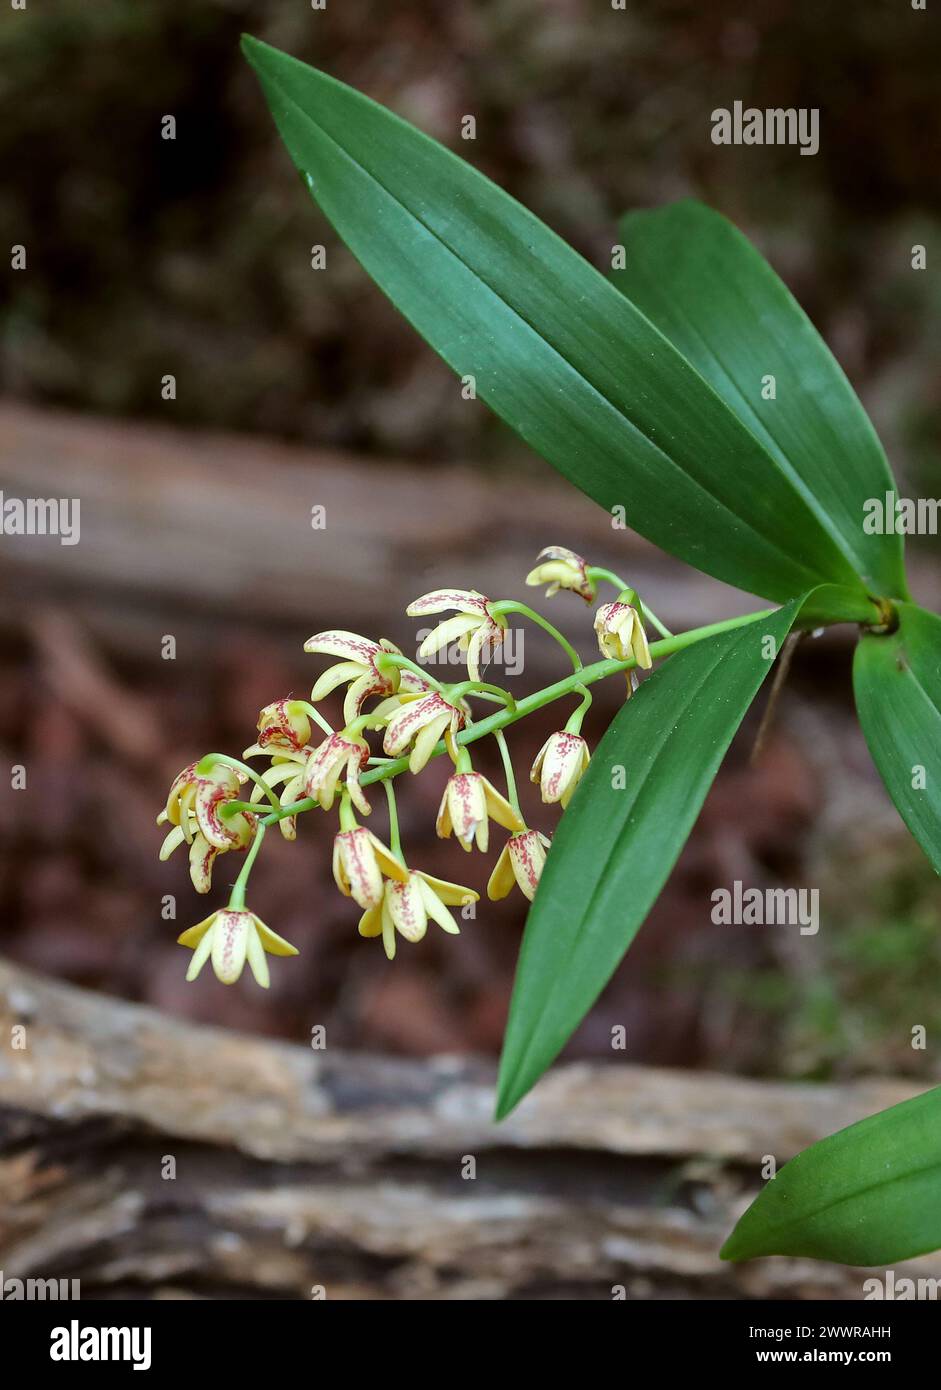 Blotched Cane Orchid or Yellow Cane Orchid, Dendrobium gracilicaule, Epidendroideae, Orchidaceae. Stock Photo